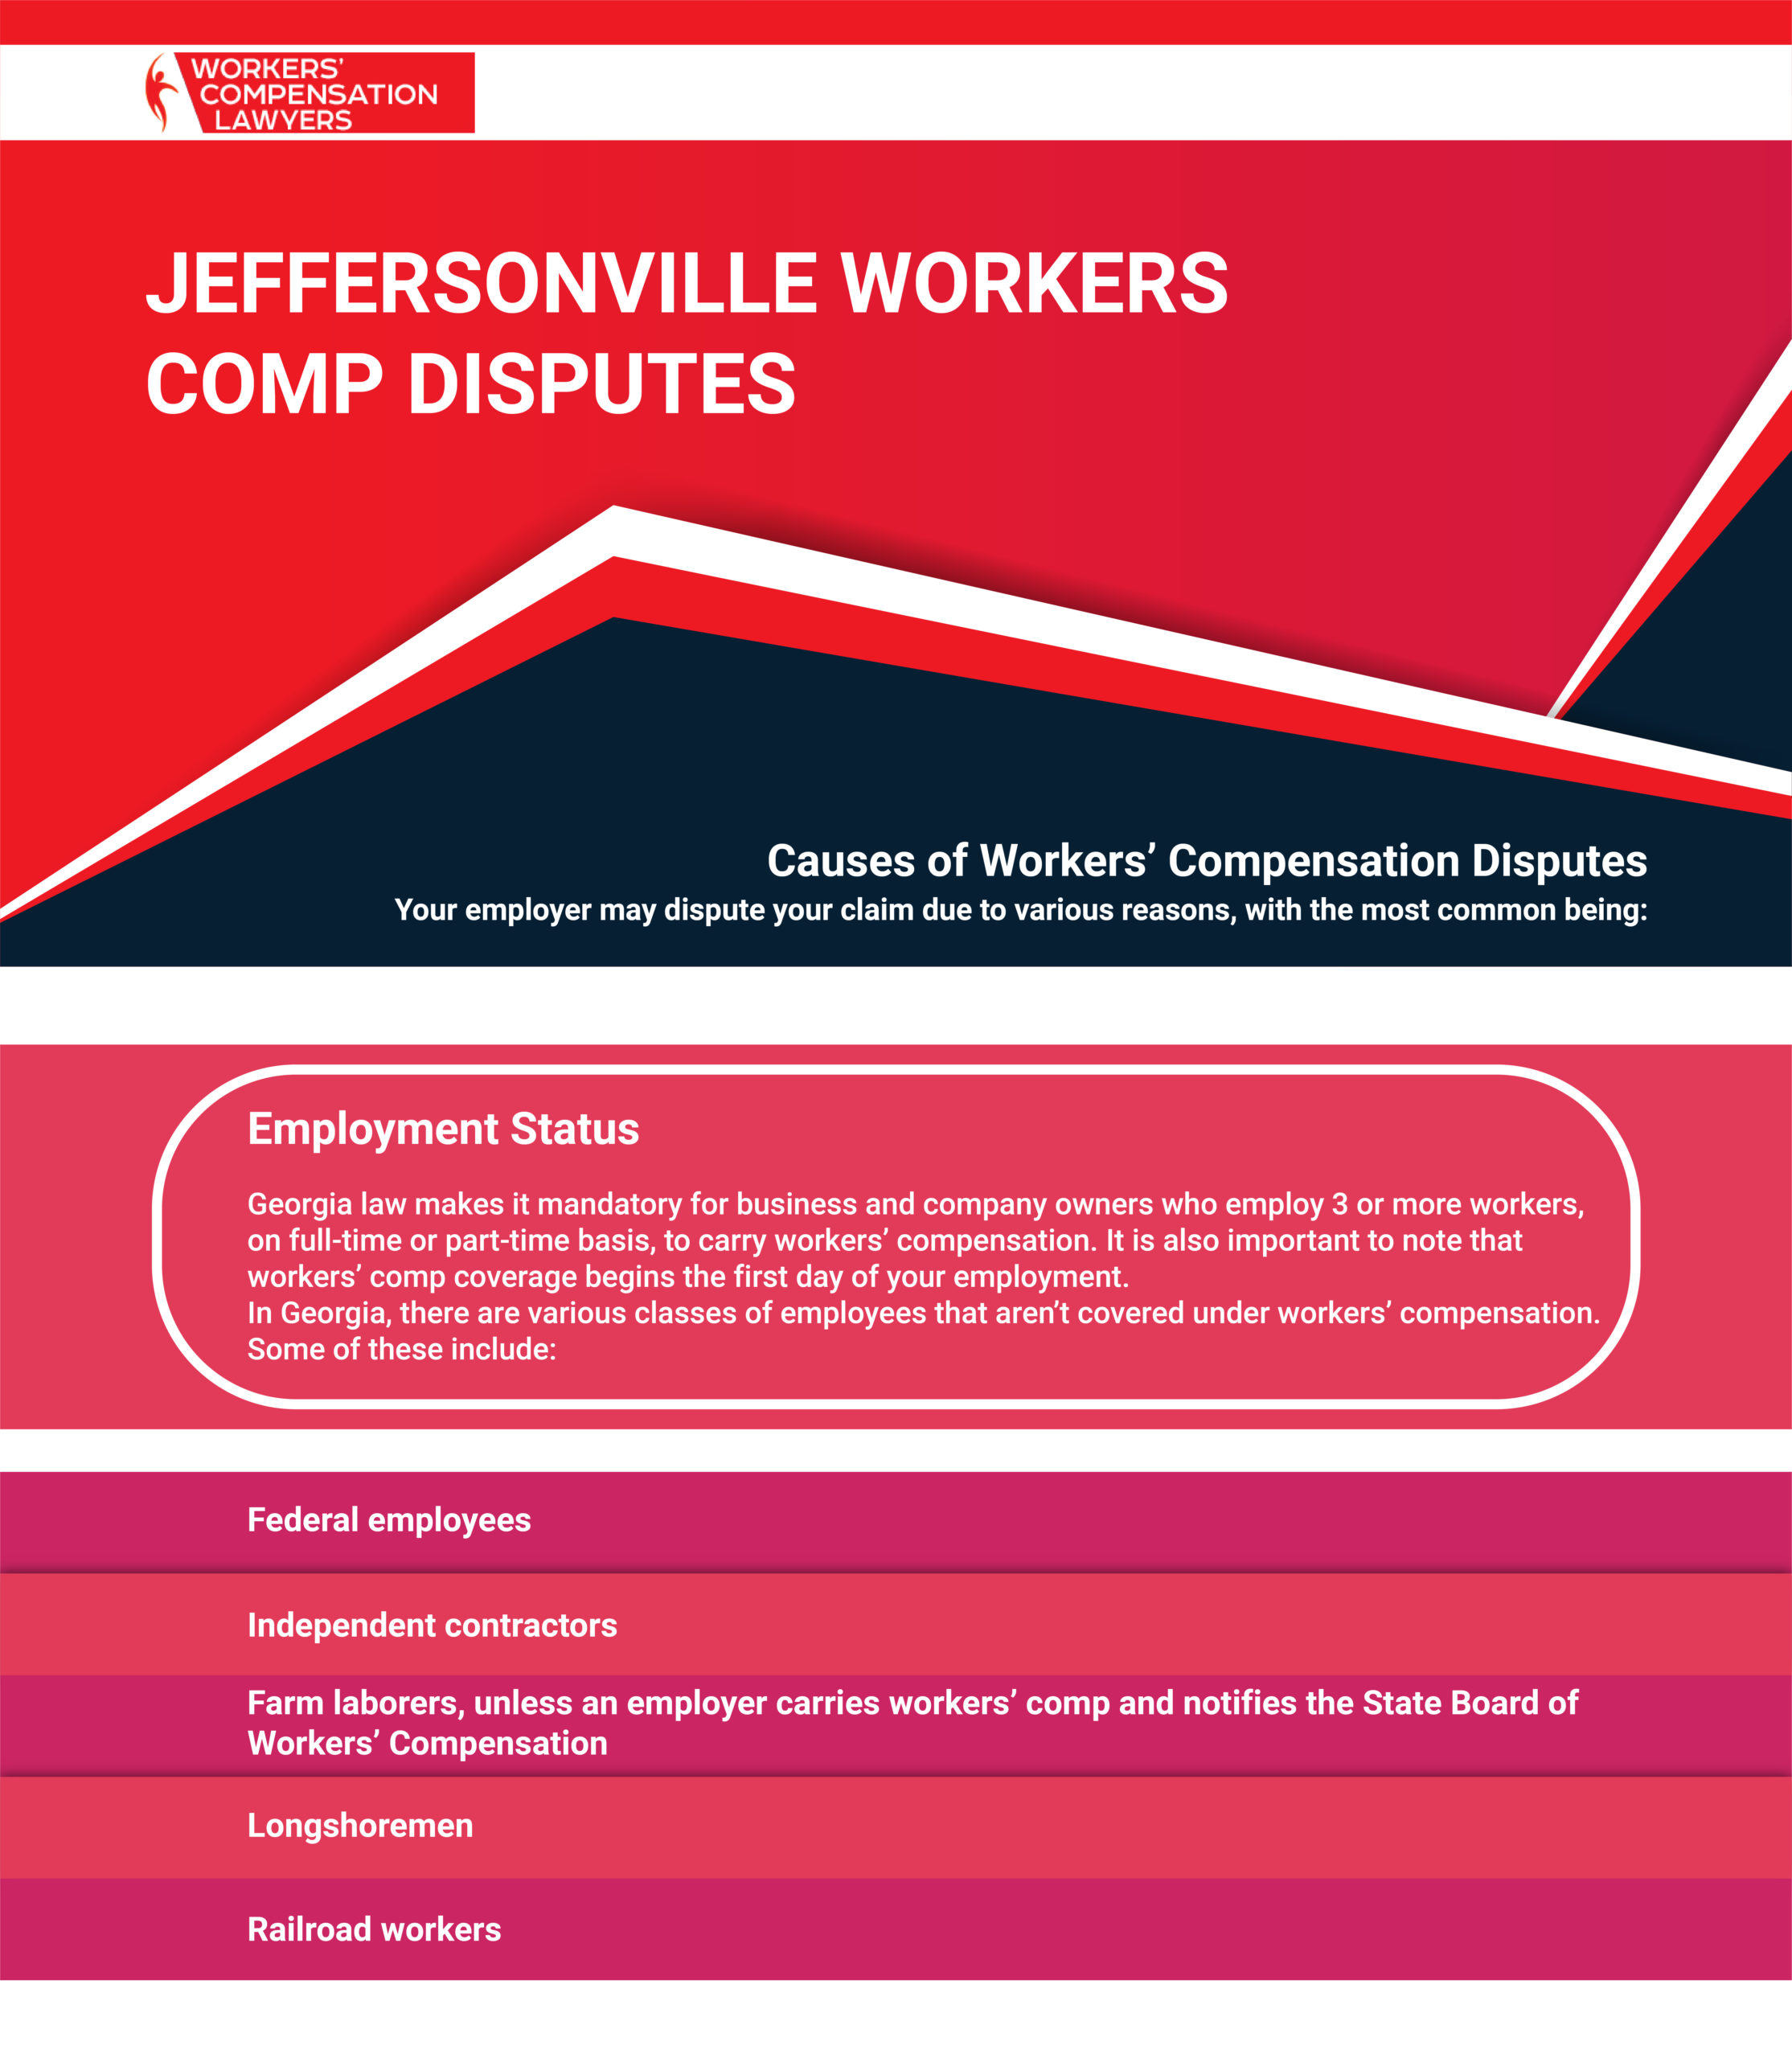 Jeffersonville Workers Compensation Disputes Infographic